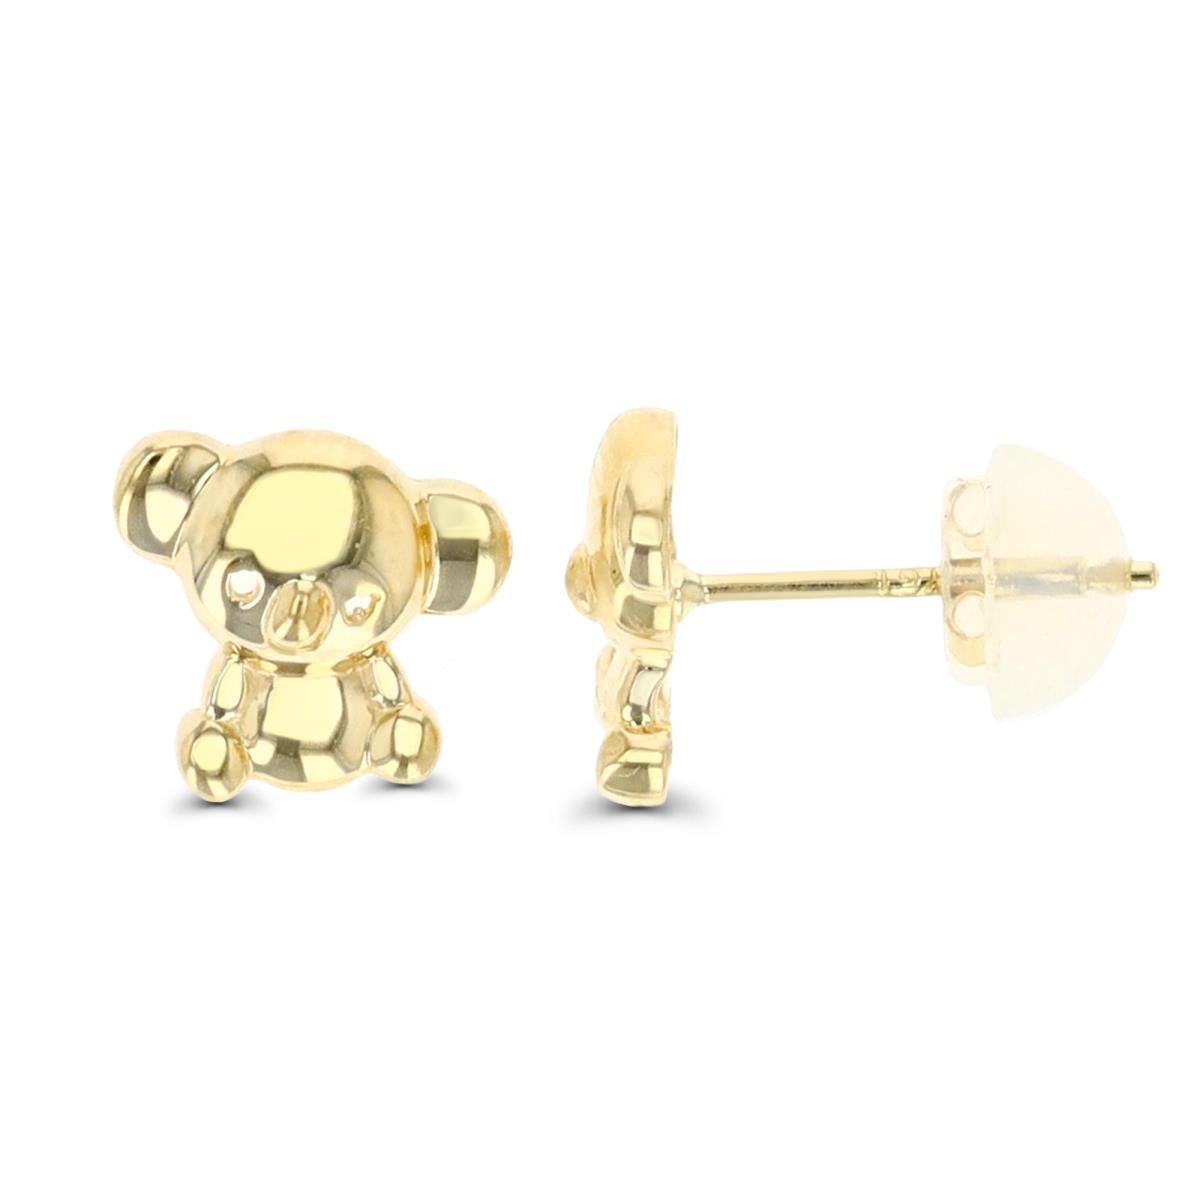 10K Yellow Gold Teddy Bear Stud Earring with Silicone Back